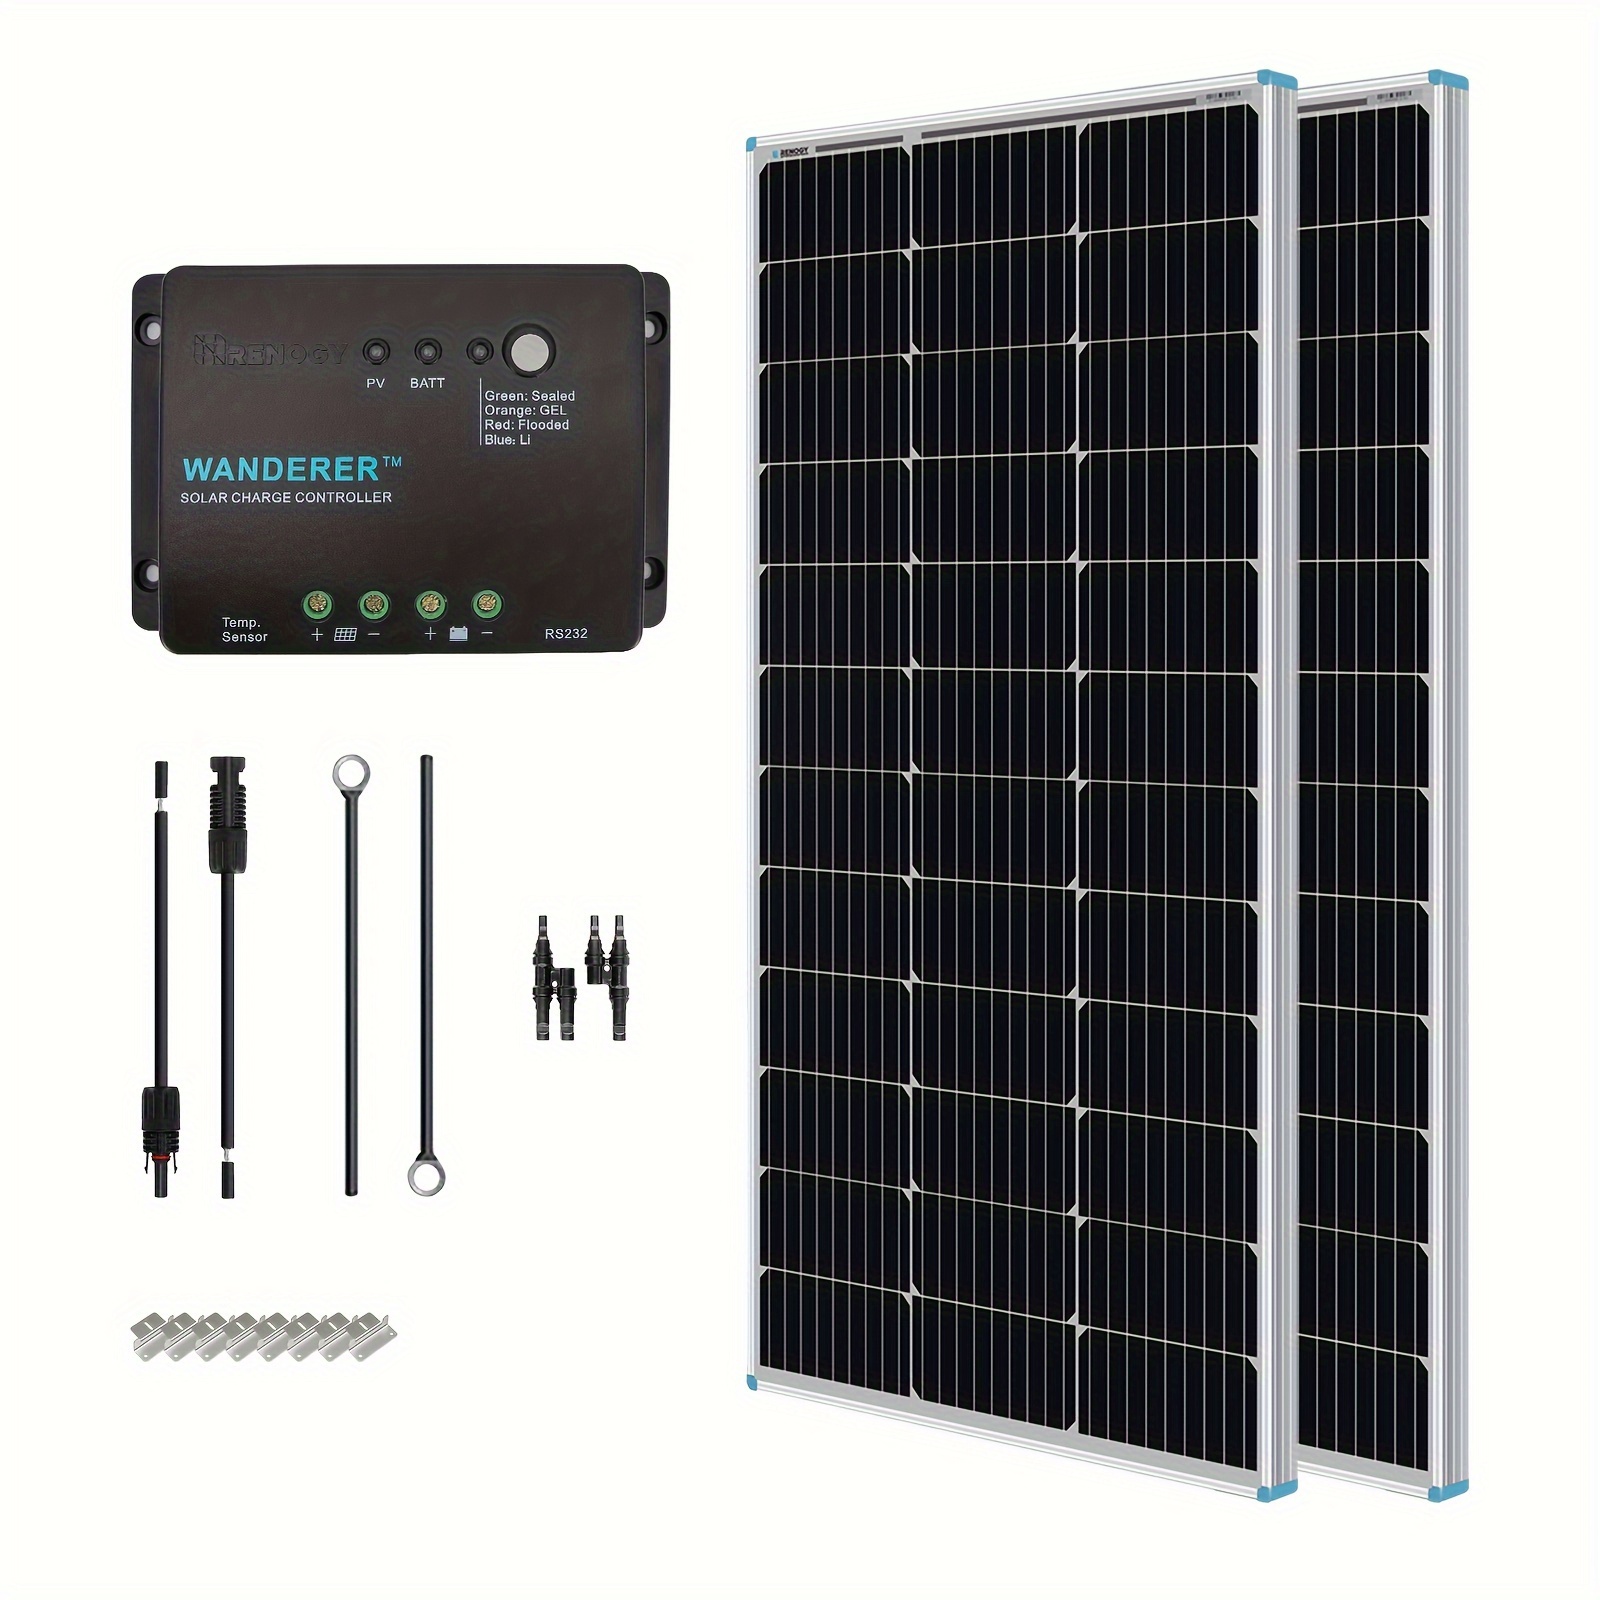 

Renogy 200 Watt 12 Volt Monocrystalline Solar Panel Starter Kit With 2 Pcs 100w Solar Panel And 30a Pwm Charge Controller For Rv, Boats, Trailer, Camper, Marine, Off-grid System